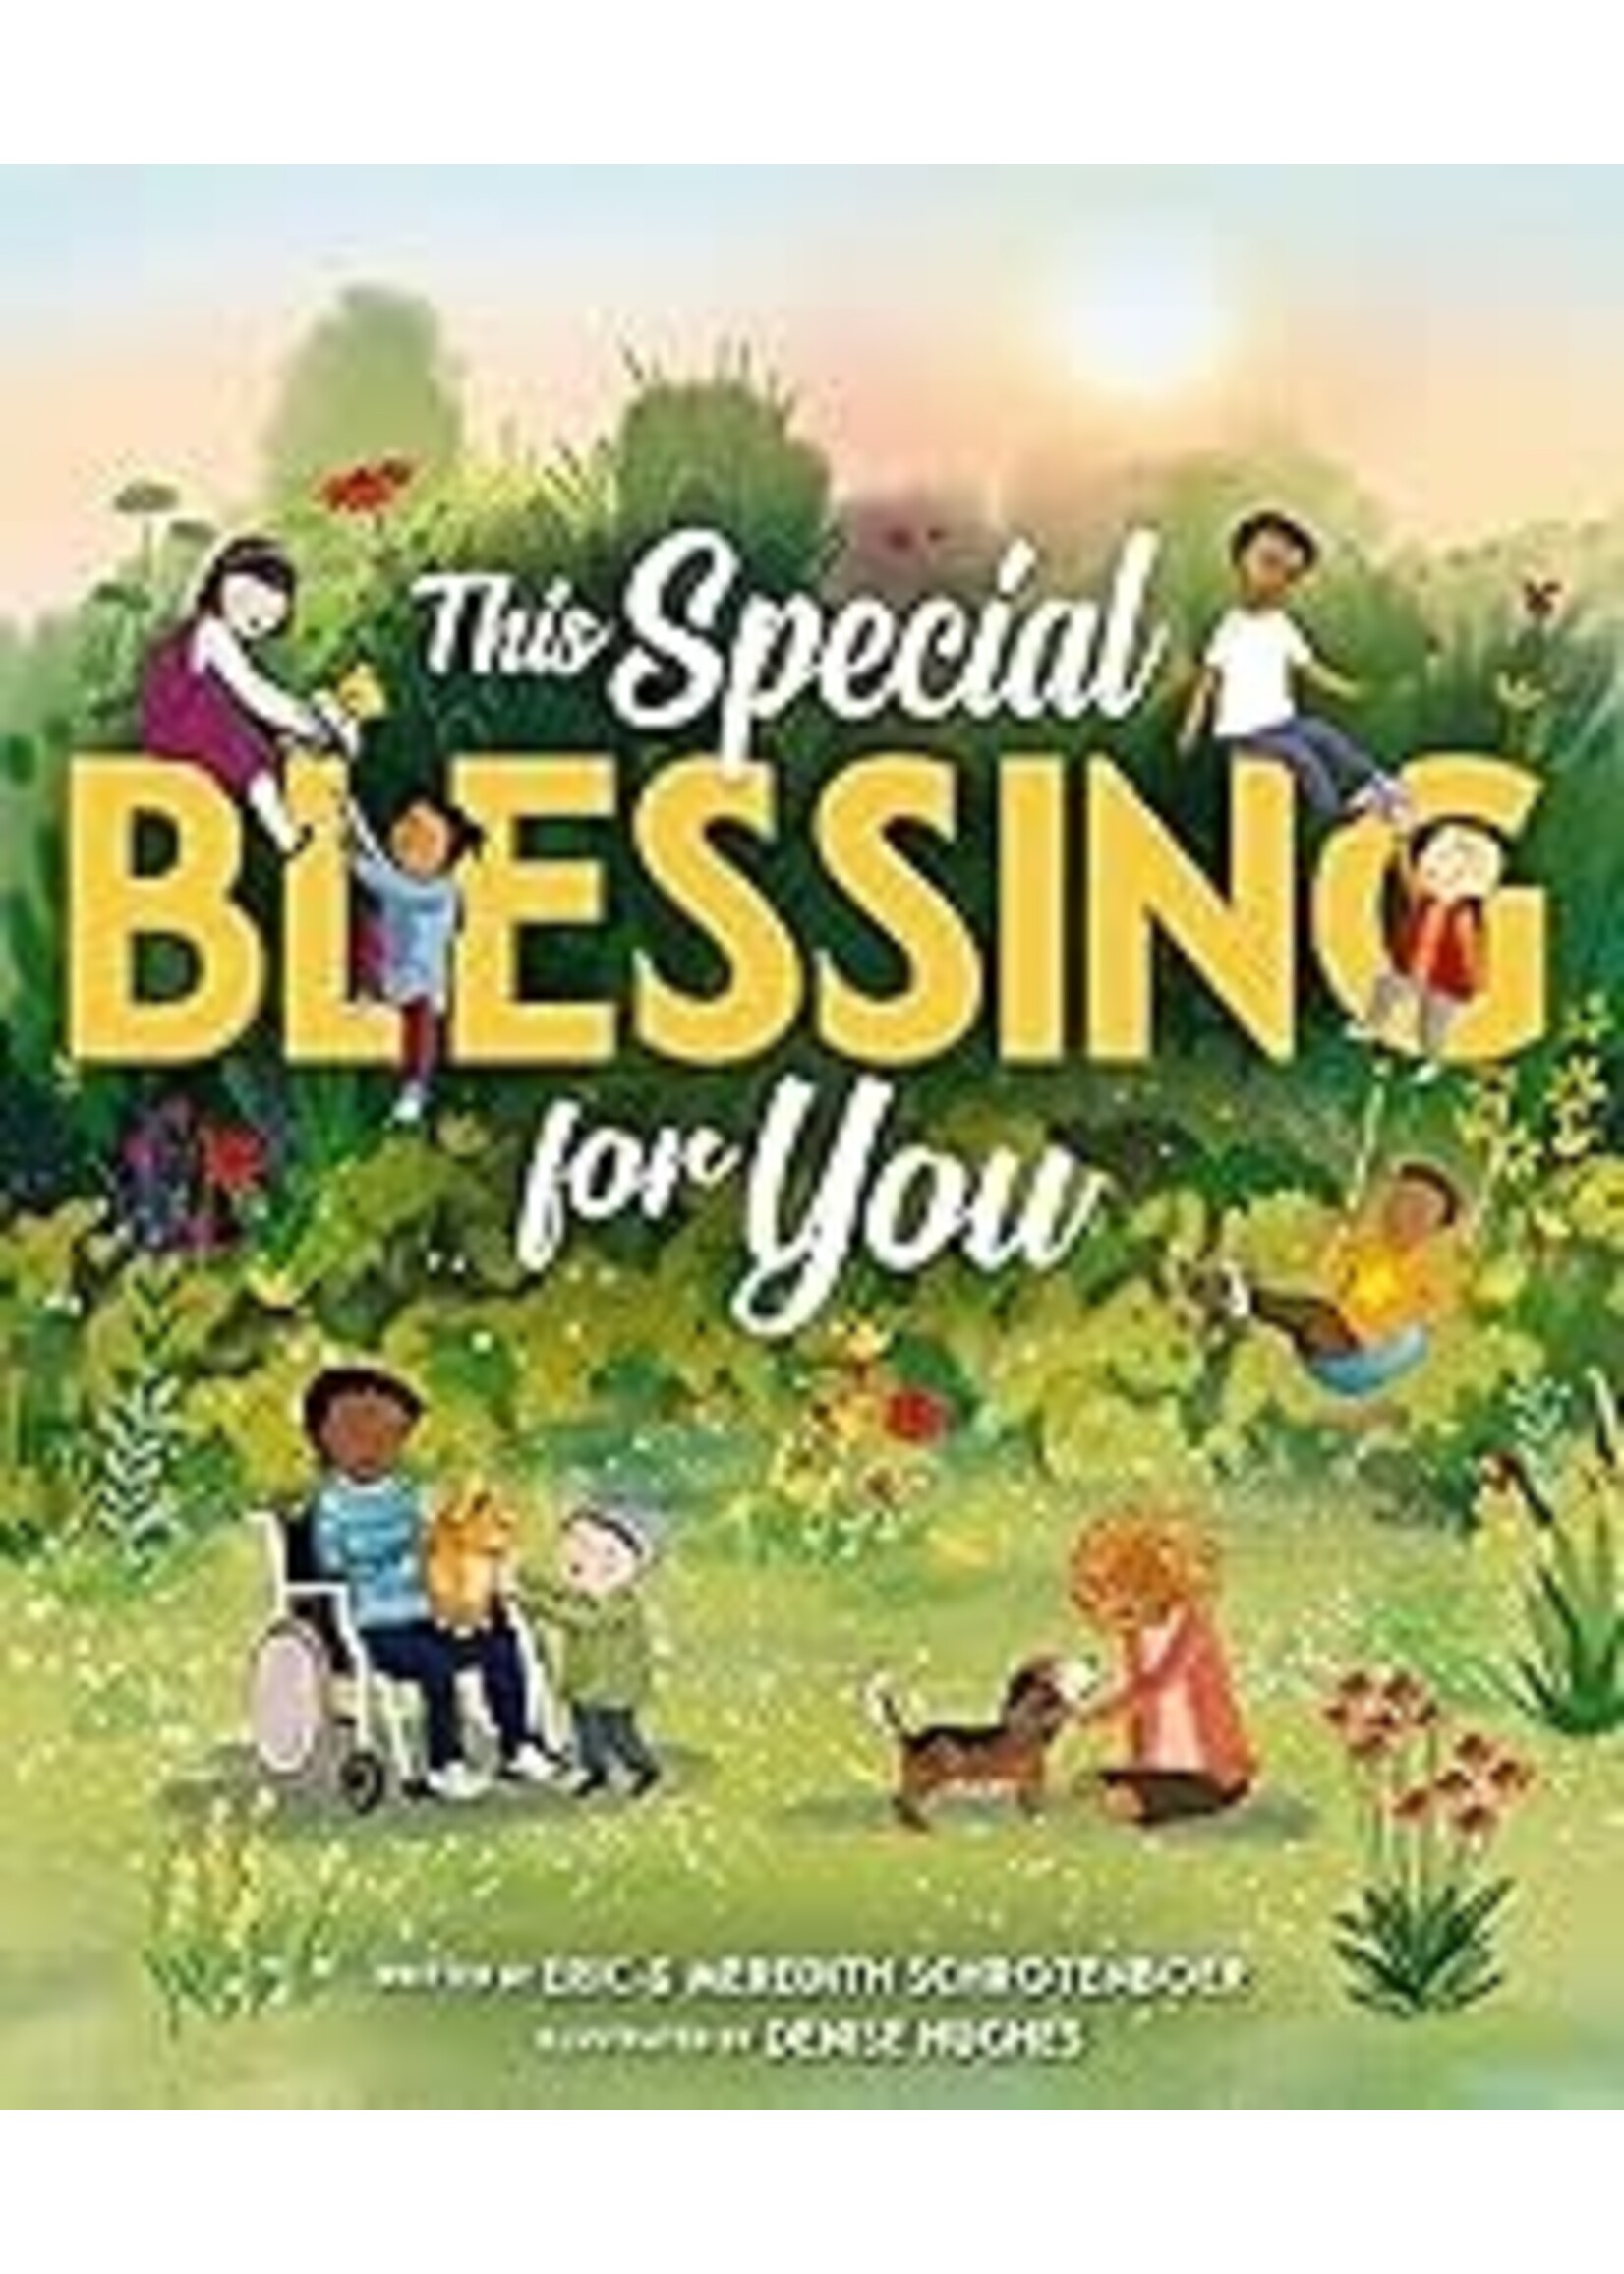 This Special Blessing For You